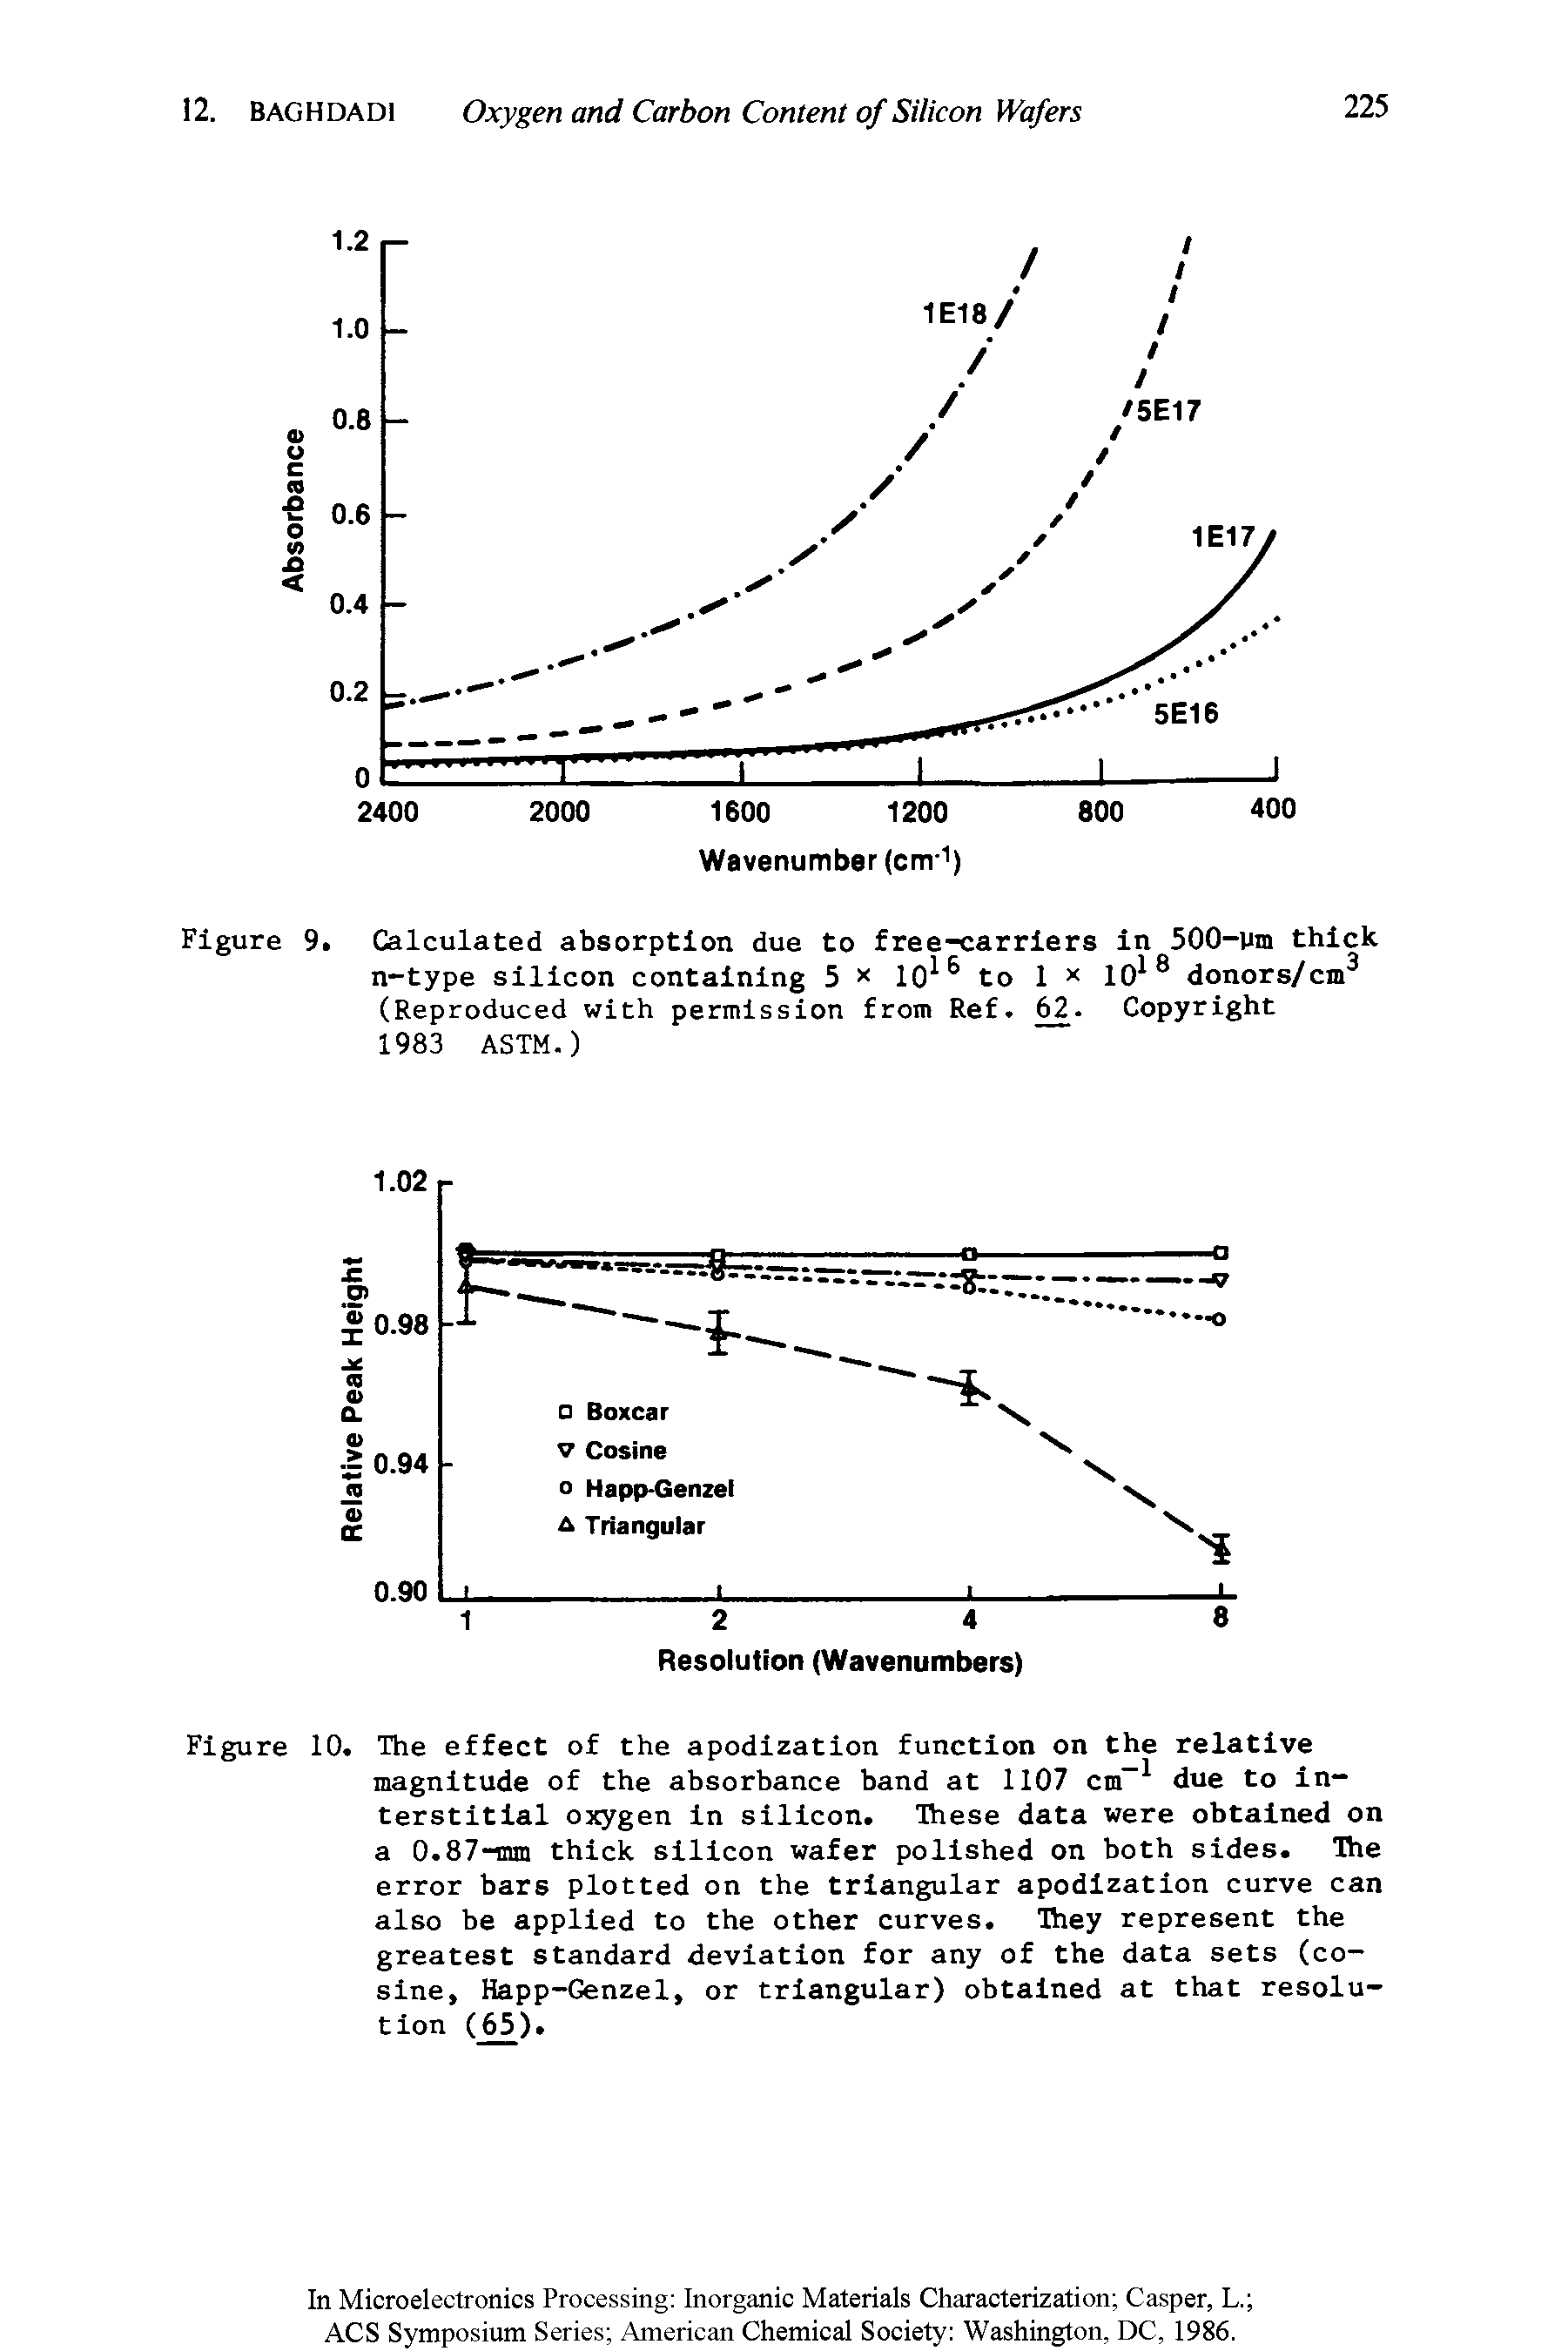 Figure 9. Calculated absorption due to free-carriers in 500-pm thick n-type silicon containing 5 x 10 to 1 x 10 donors/cm (Reproduced with permission from Ref. Copyright...